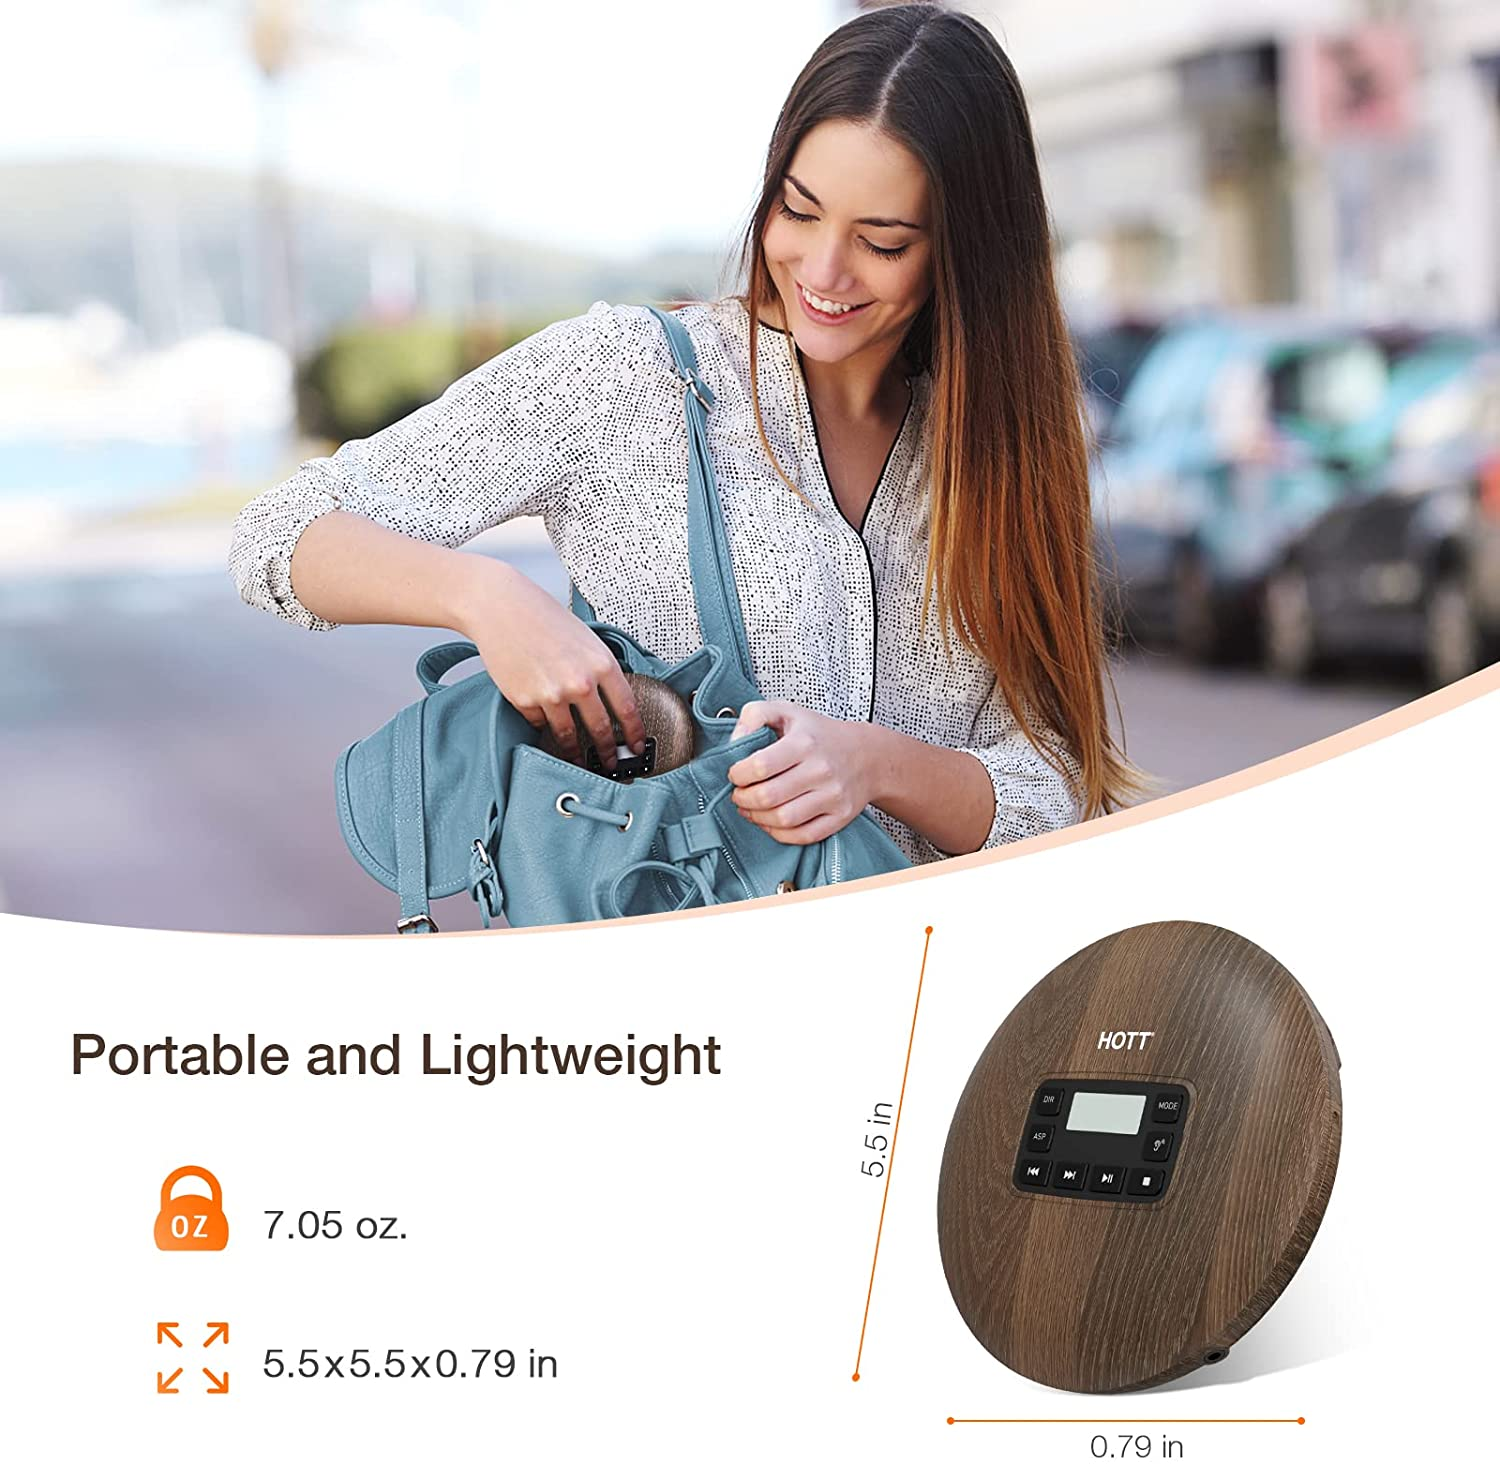 HOTT Portable CD Player CD611 Small Walkman CD Player with Stereo Headphones USB Cable LED Display Anti-Skip Anti-Shock Personal Compact Disc Music Player Wood - image 4 of 6